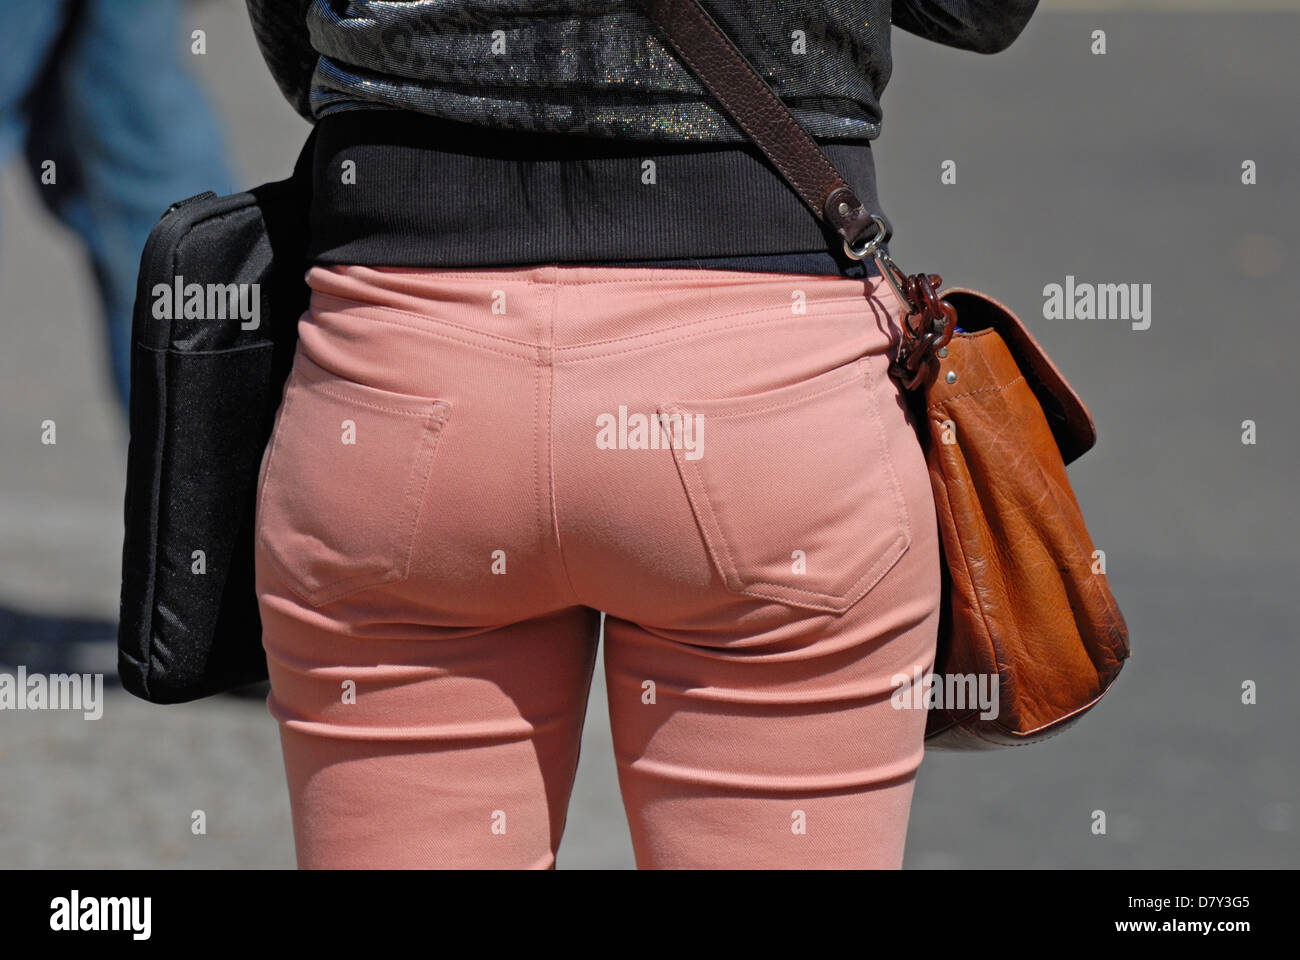 London, England, UK. Woman wearing tight, pink, creased jeans and carrying leather bag Stock Photo